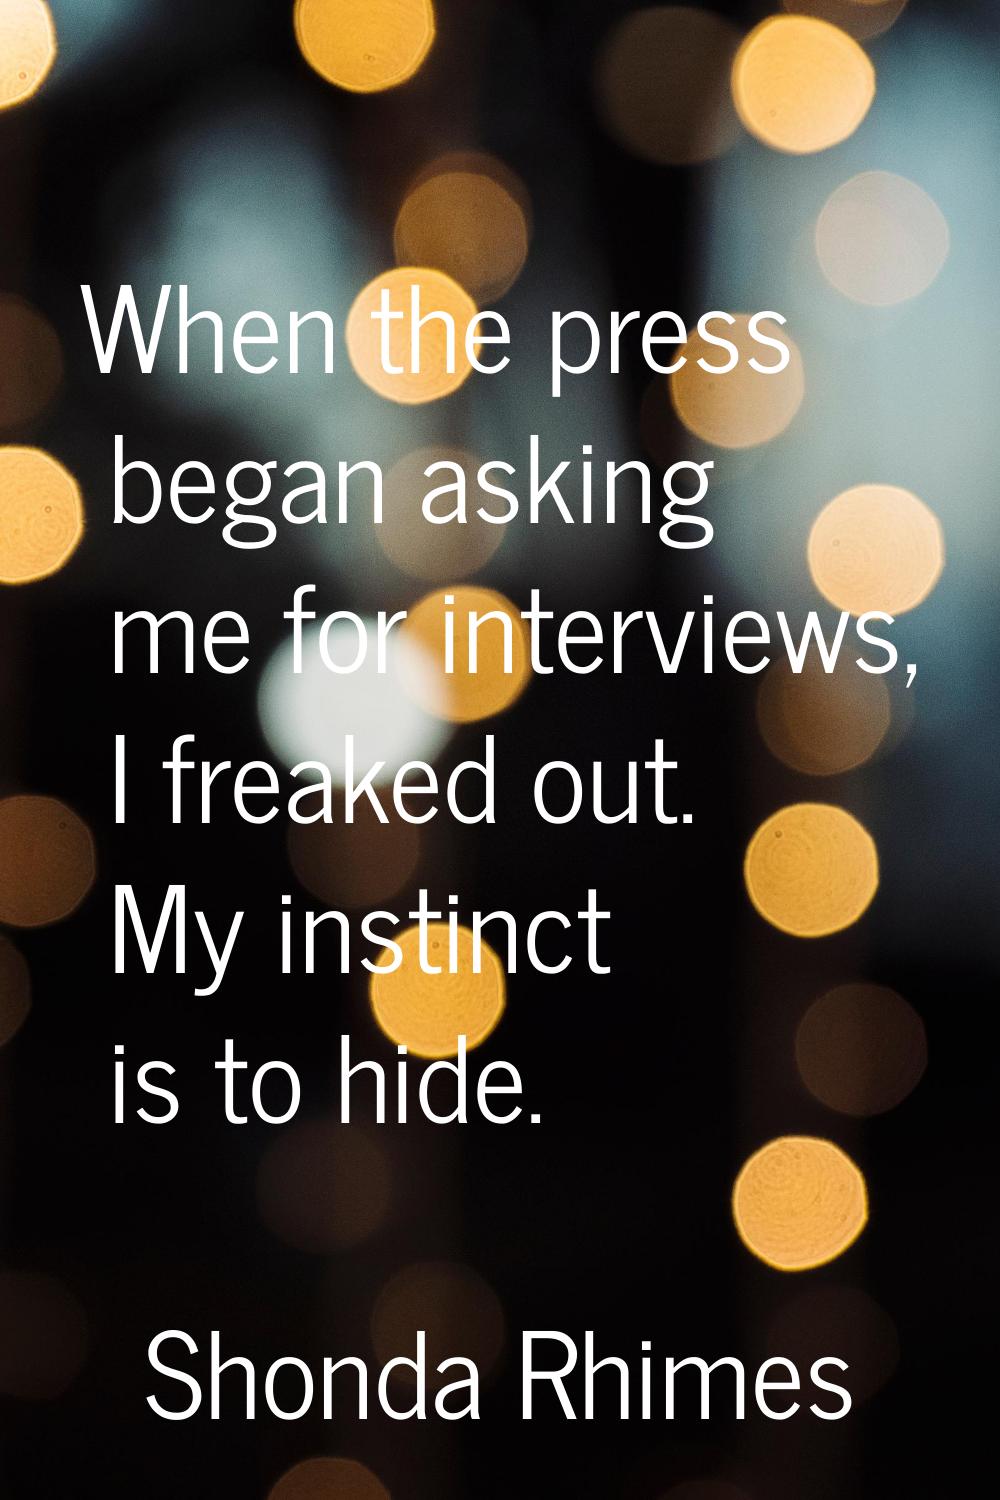 When the press began asking me for interviews, I freaked out. My instinct is to hide.